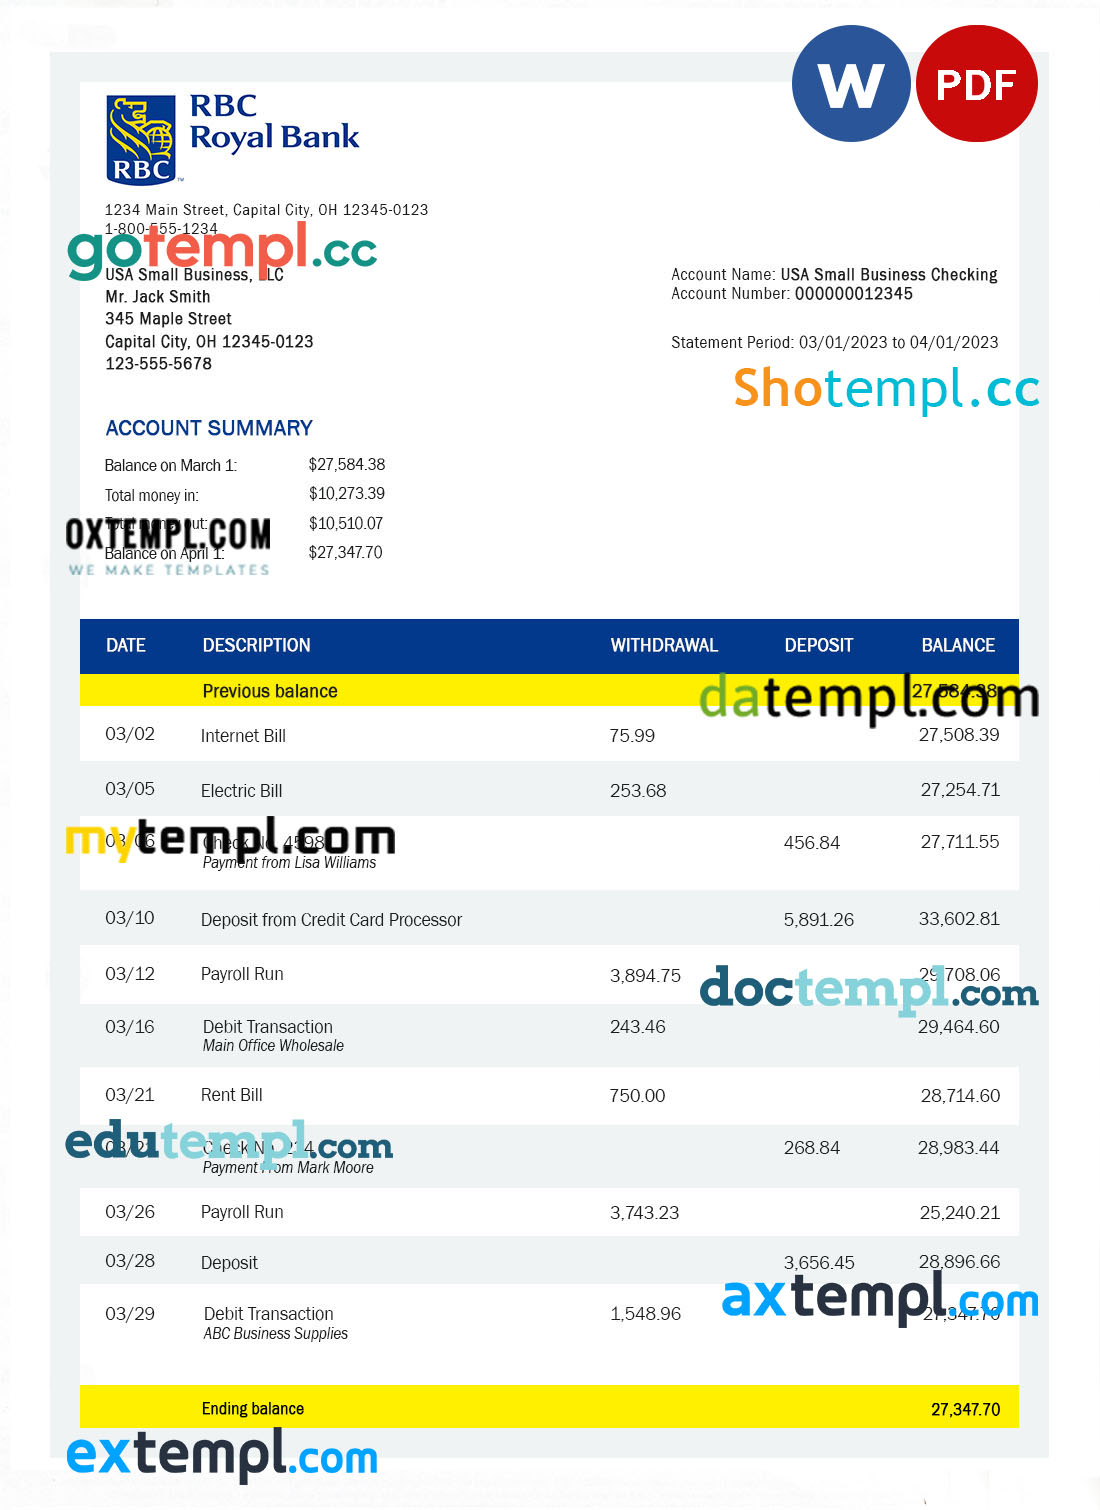 editable template, RBC Royal Bank enterprise checking account statement Word and PDF template